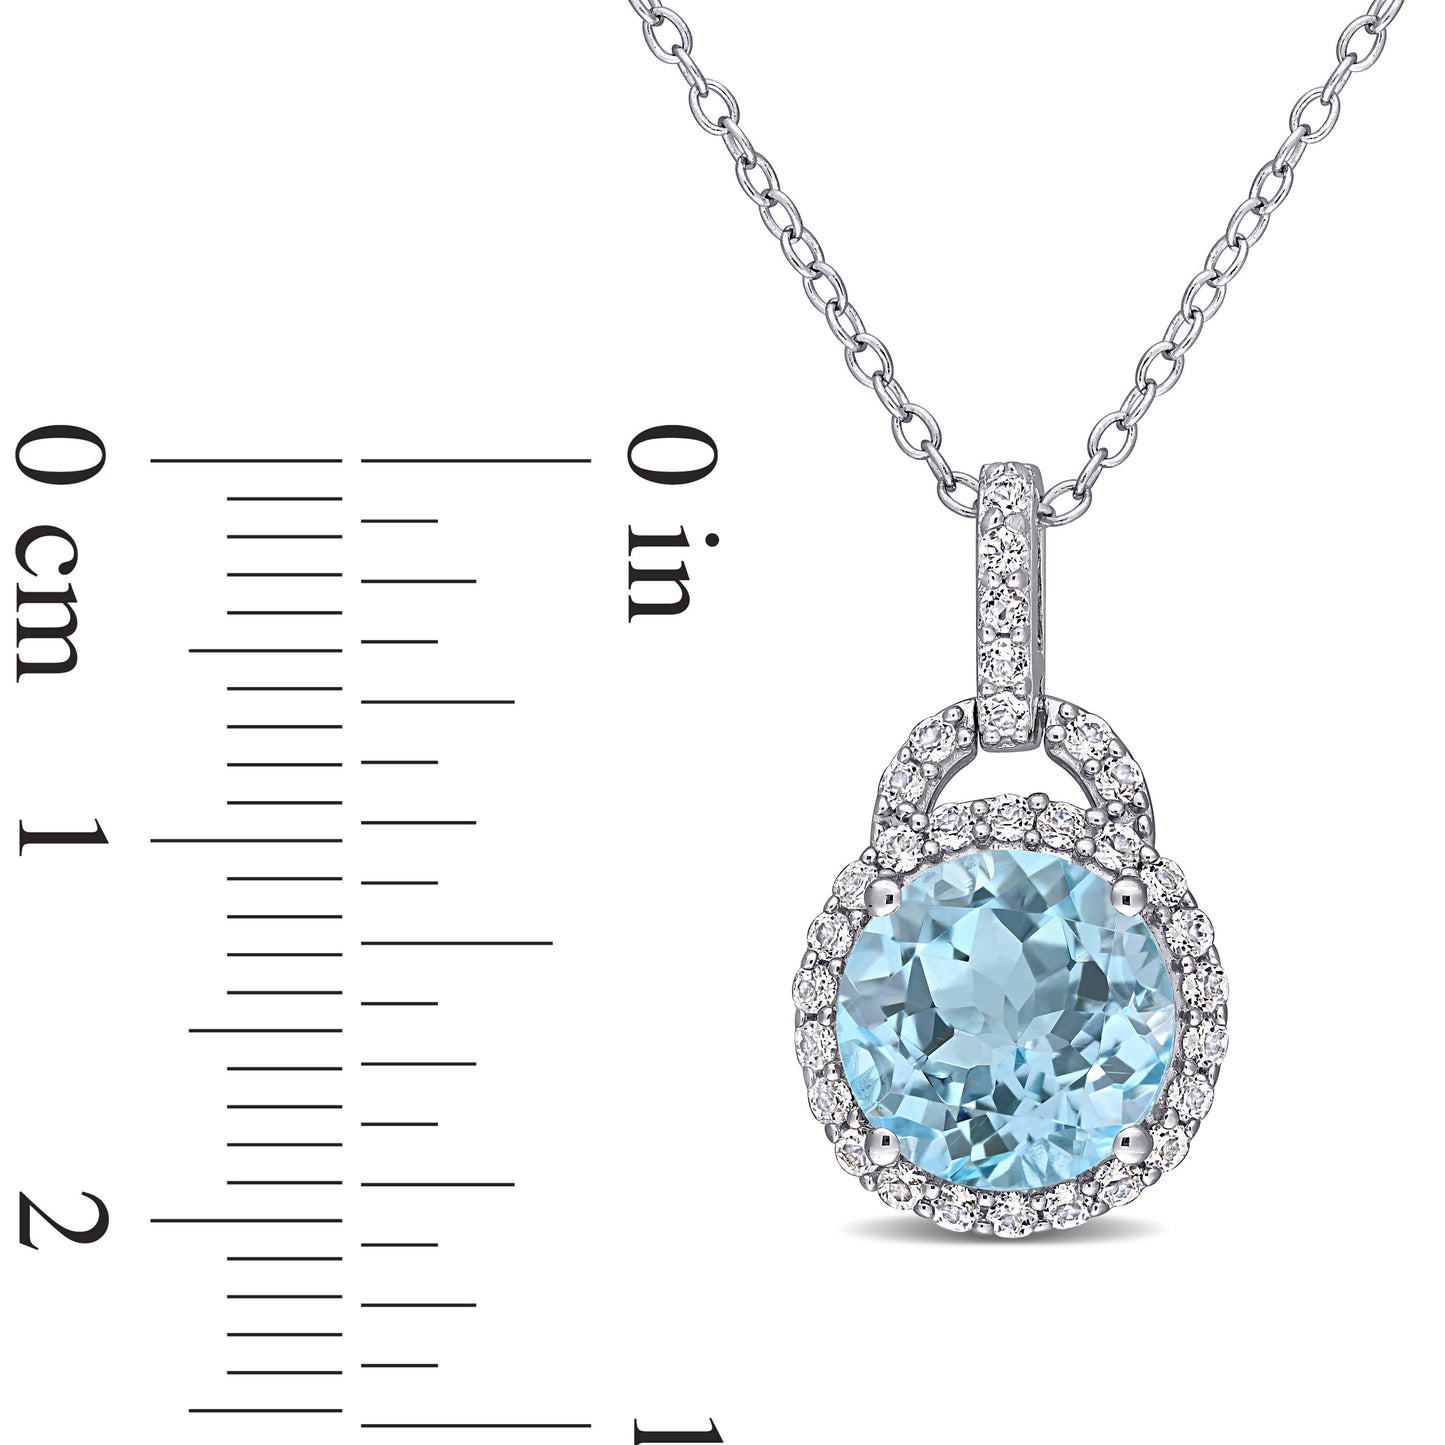 4ct Blue & White Topaz Necklace in Sterling Silver